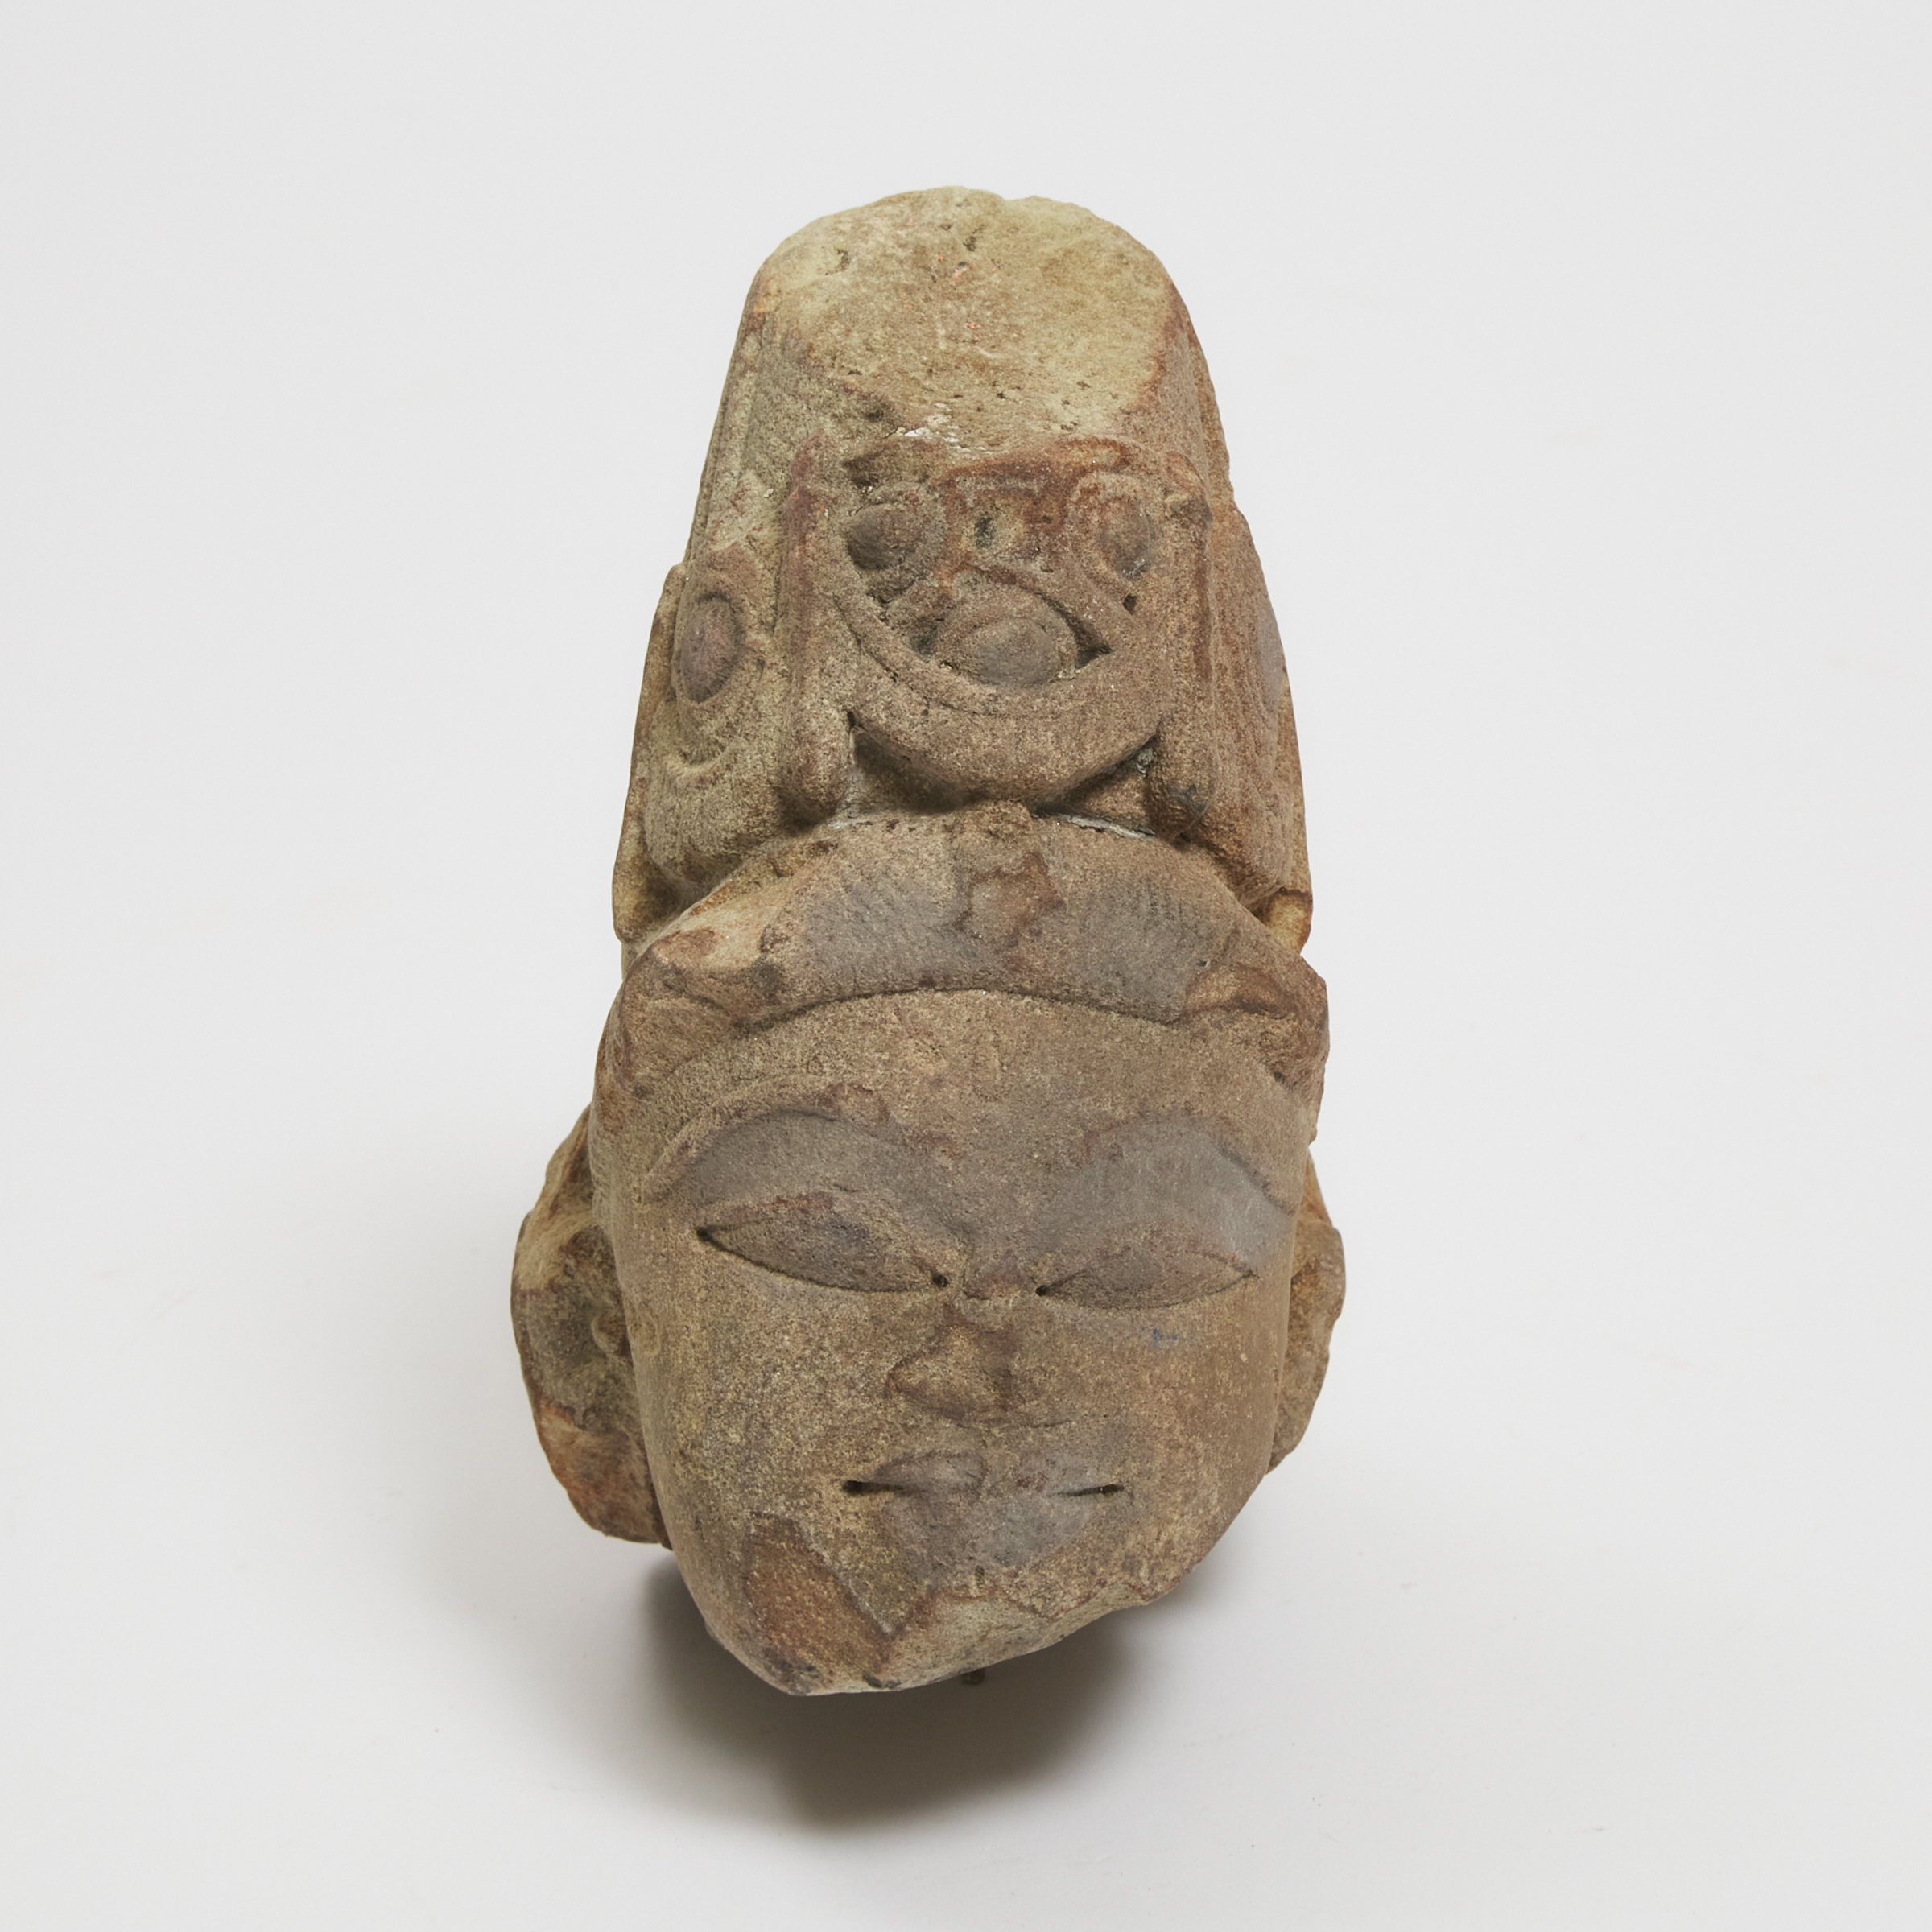 Indonesian Stone Head, 4th to 7th